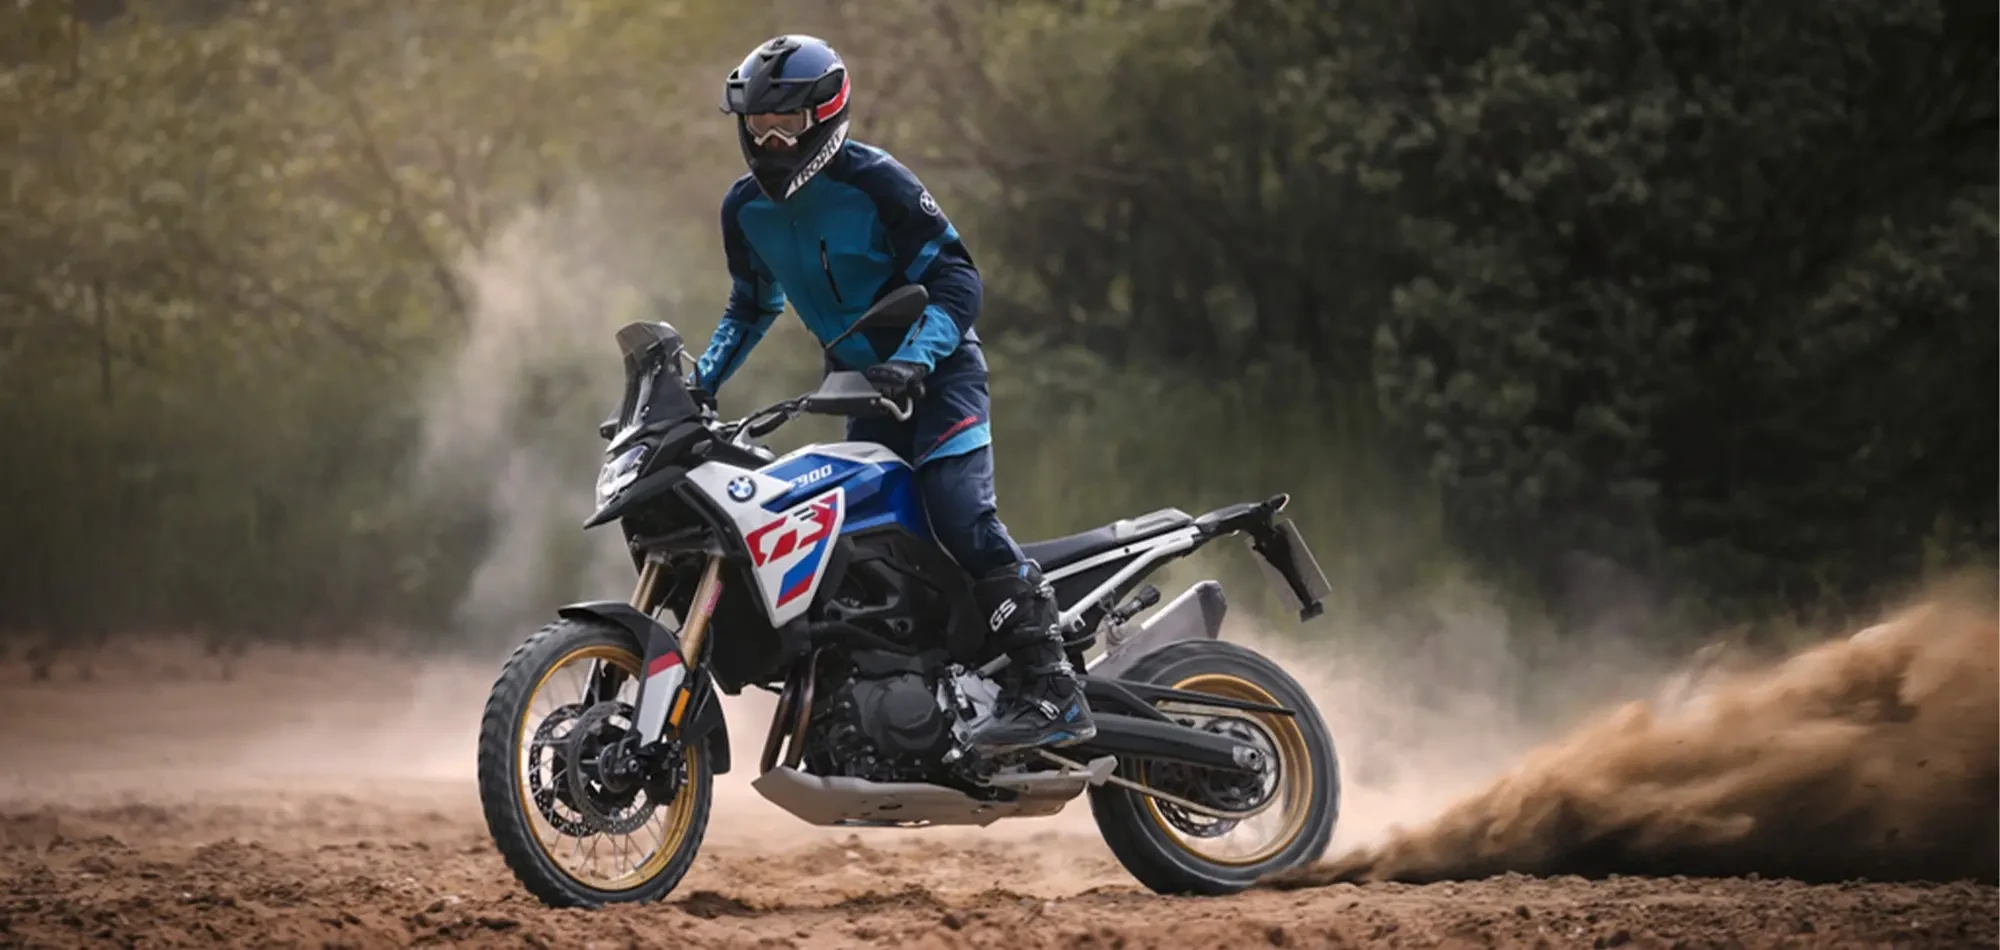 Action image of BMW Motorrad F 900 GS Enduro, available at Brisan Motorcycles Newcastle, crossed up in the dirt with rear wheel spinning